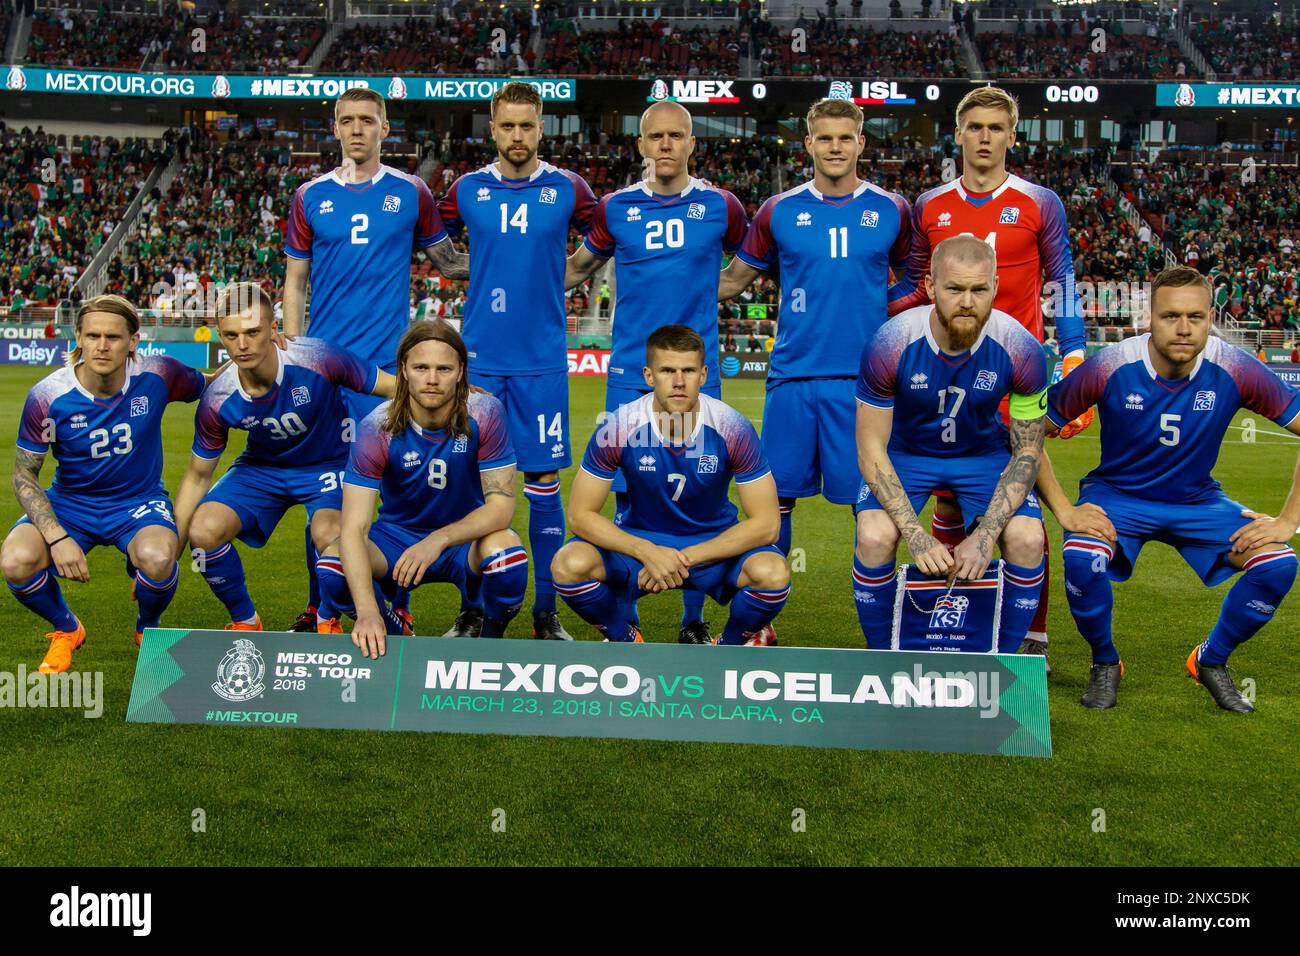 SANTA CLARA, CA - MARCH 23: Iceland team picture before the international  match between Mexico and Iceland on Friday, March 23, 2018 at Levi's Stadium  in Santa Clara, CA. Final Score: Mexico-3,